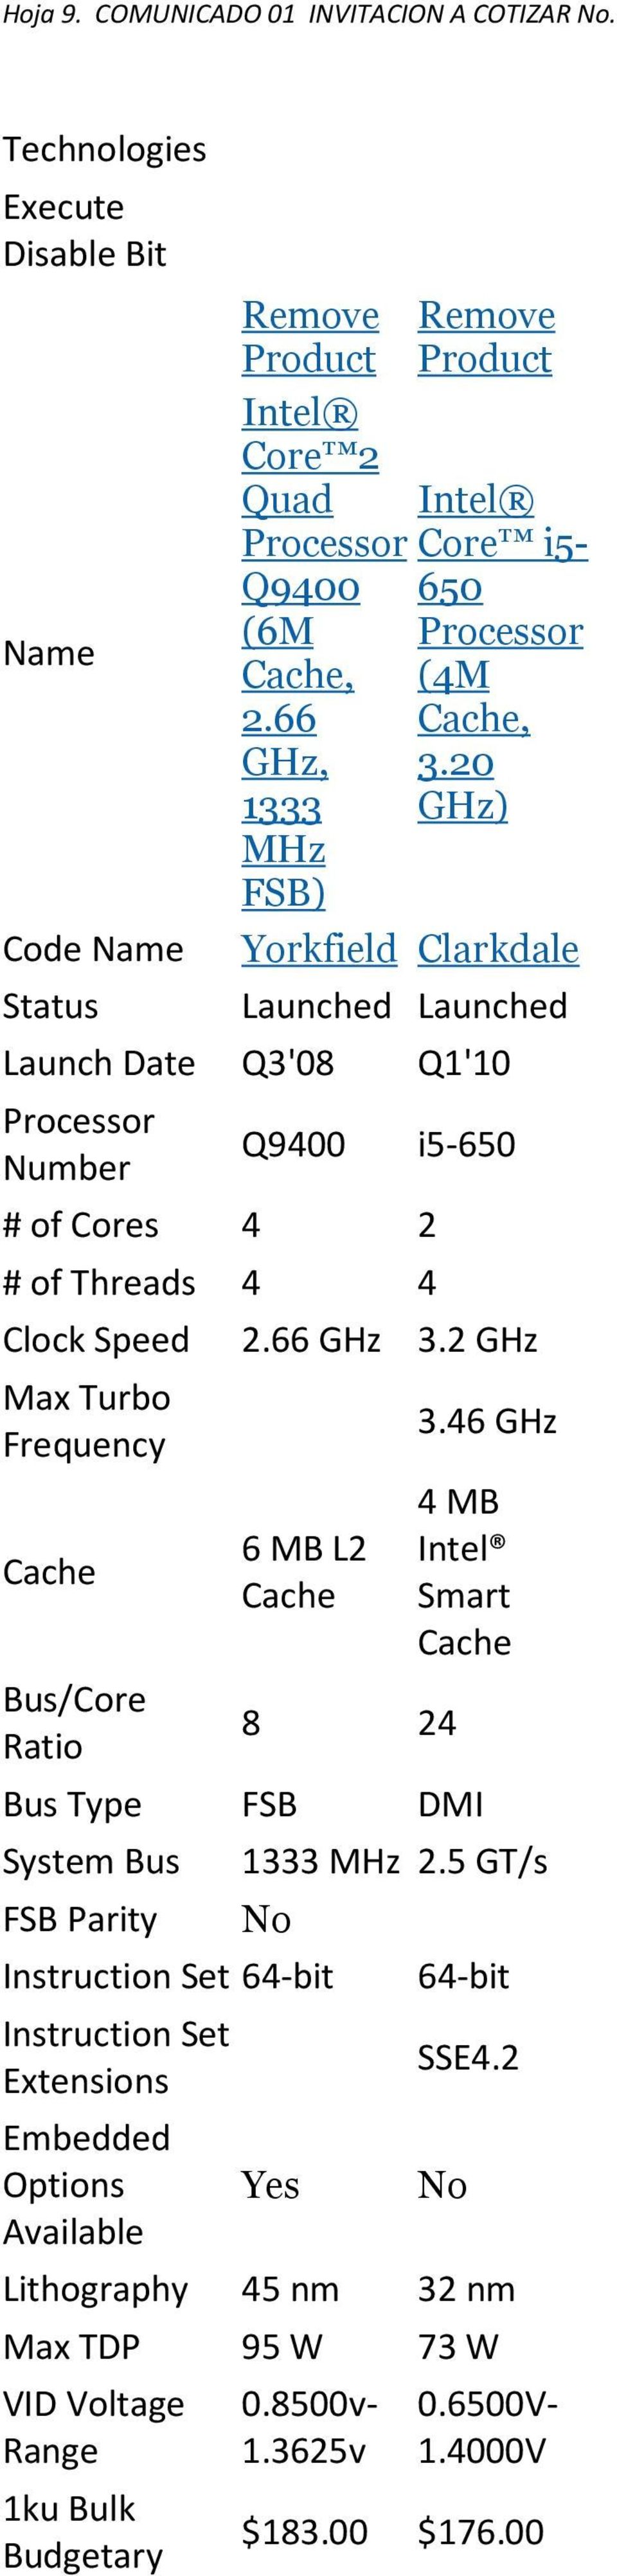 20 1333 GHz) MHz FSB) Code Name Yorkfield Clarkdale Status Launch Date Q3'08 Processor Number Launched Launched Q1'10 Q9400 i5-650 # of Cores 4 2 # of Threads 4 4 Clock Speed 2.66 GHz 3.